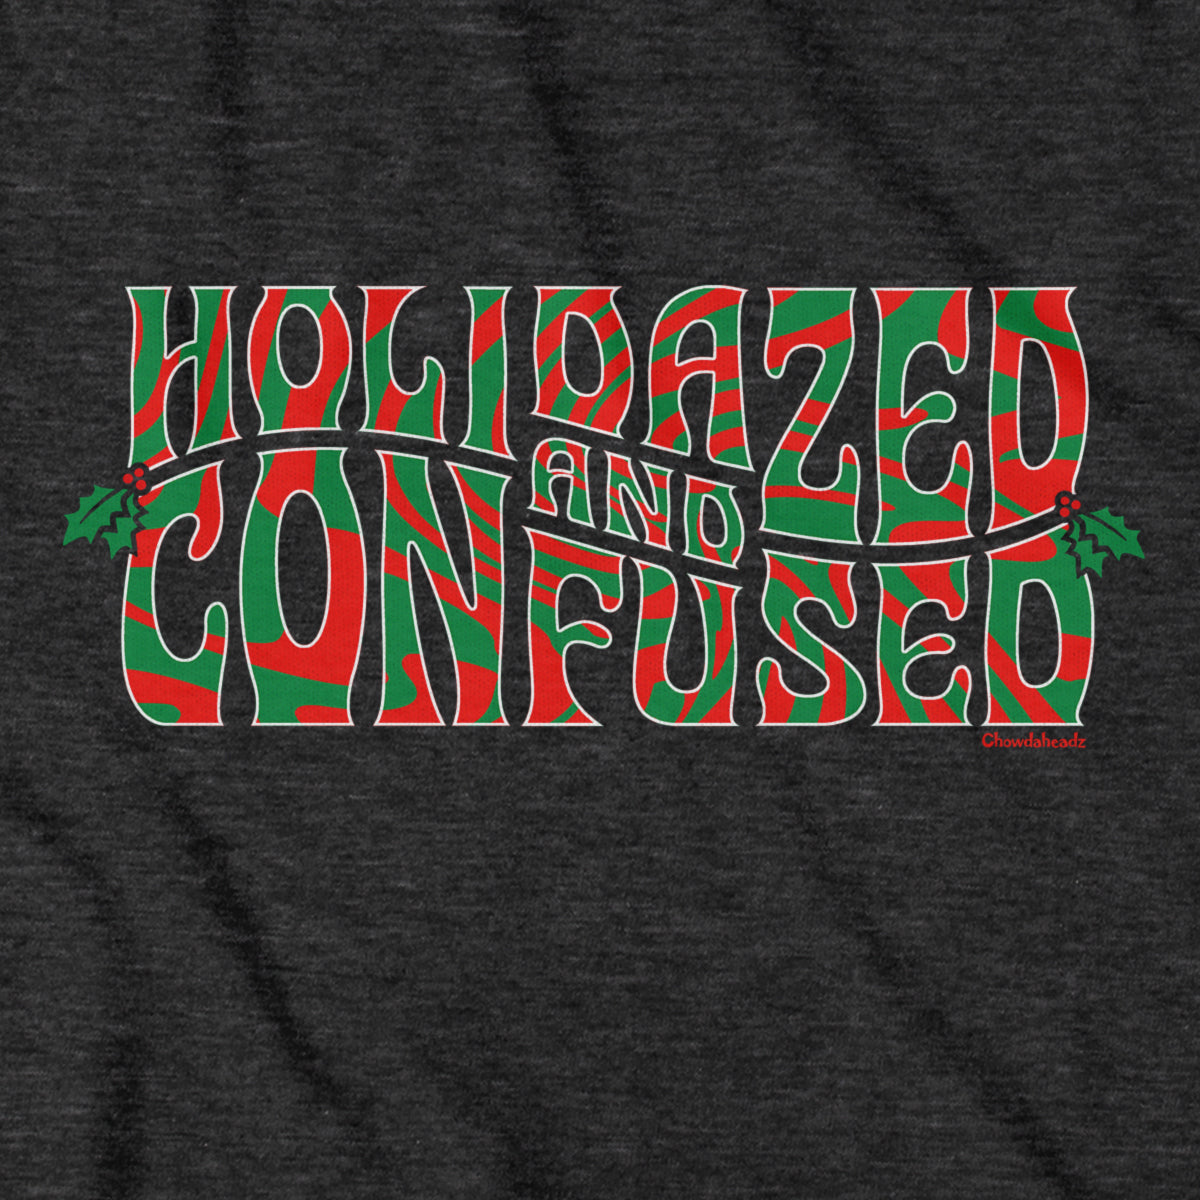 Holidazed And Confused T-Shirt - Chowdaheadz